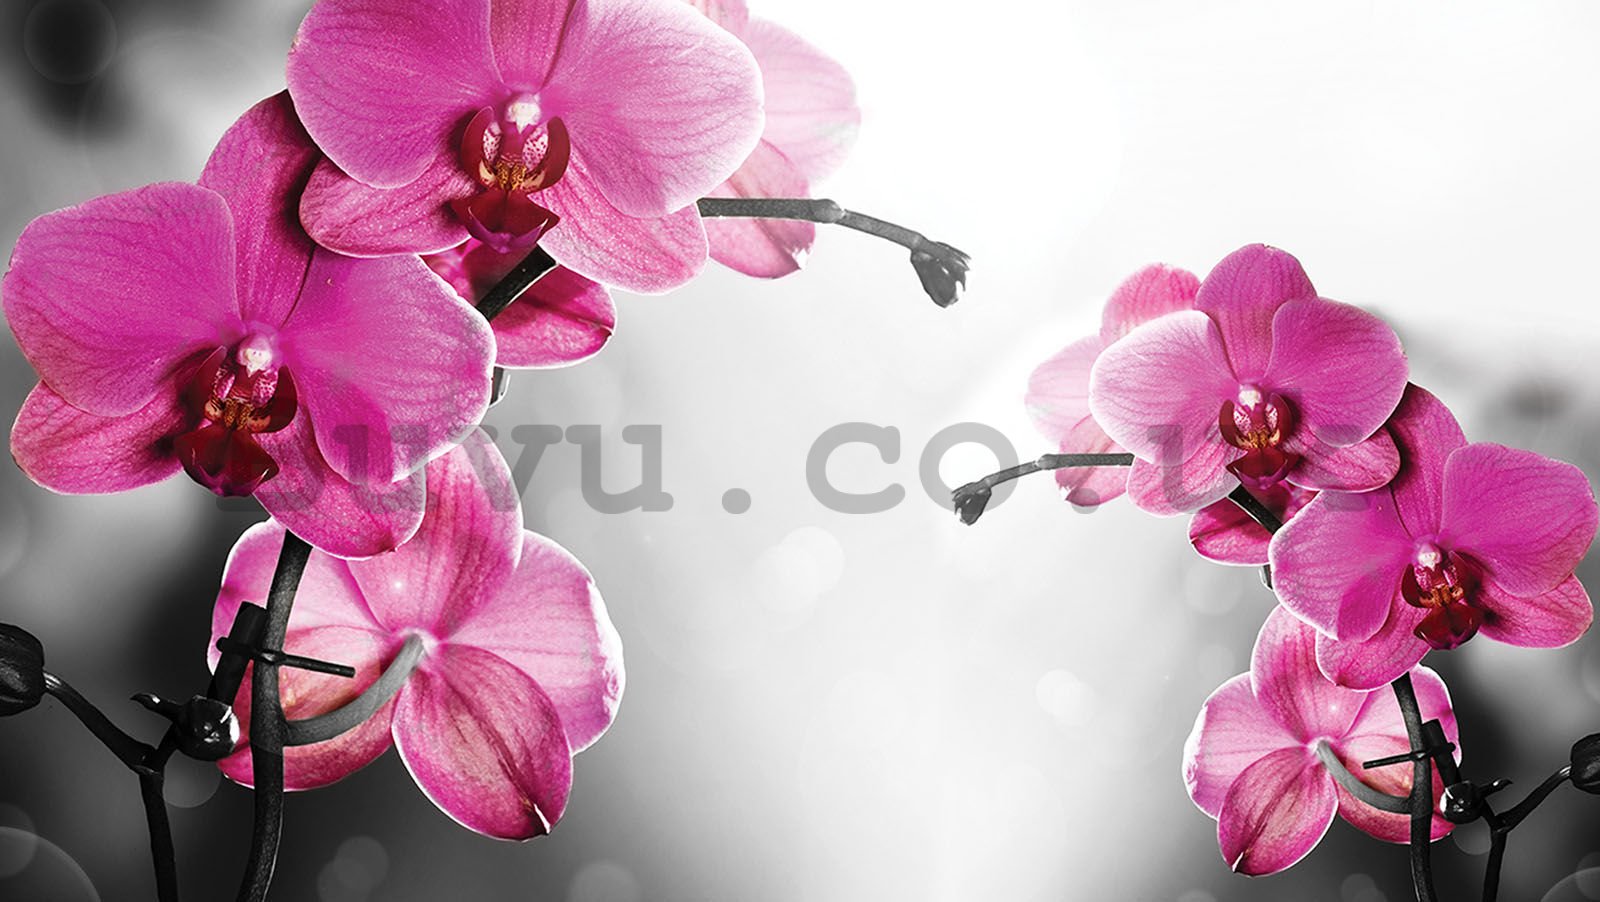 Wall mural vlies: Orchid on grey background - 152,5x104 cm